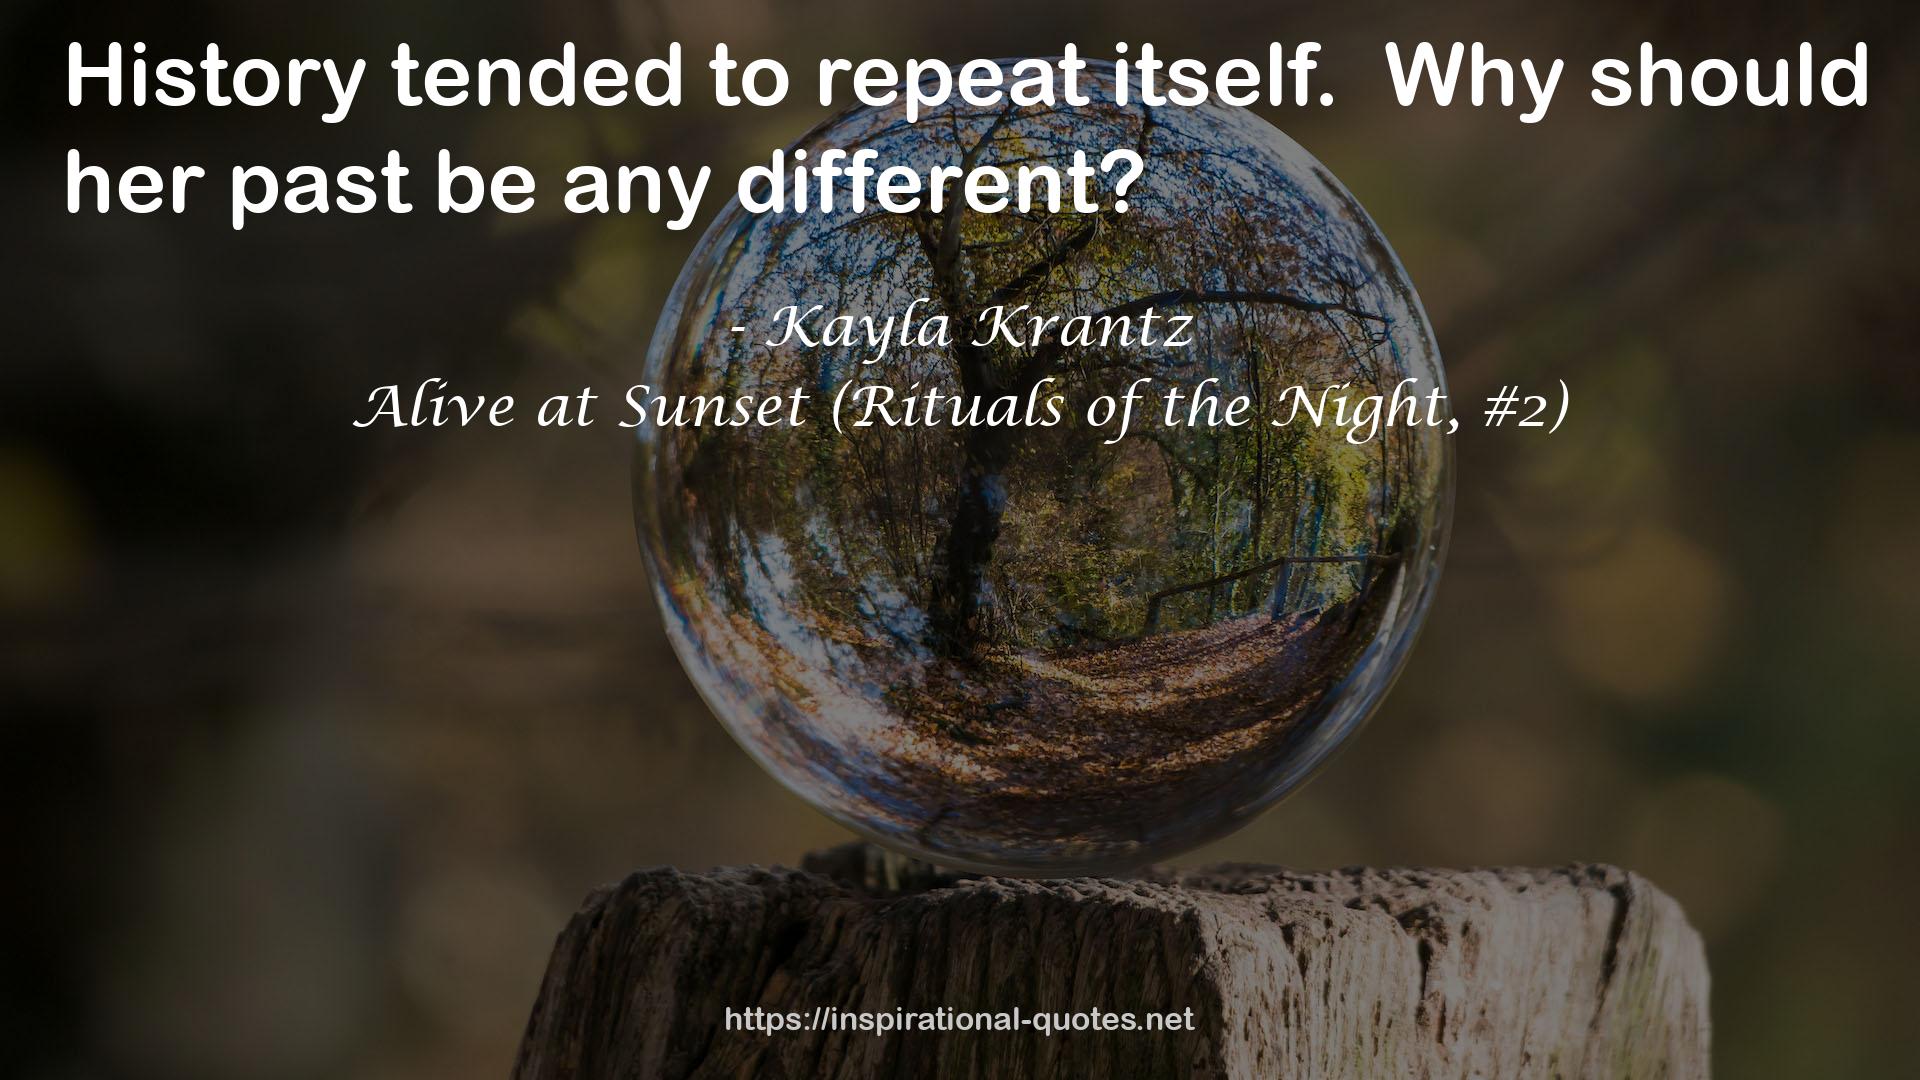 Alive at Sunset (Rituals of the Night, #2) QUOTES